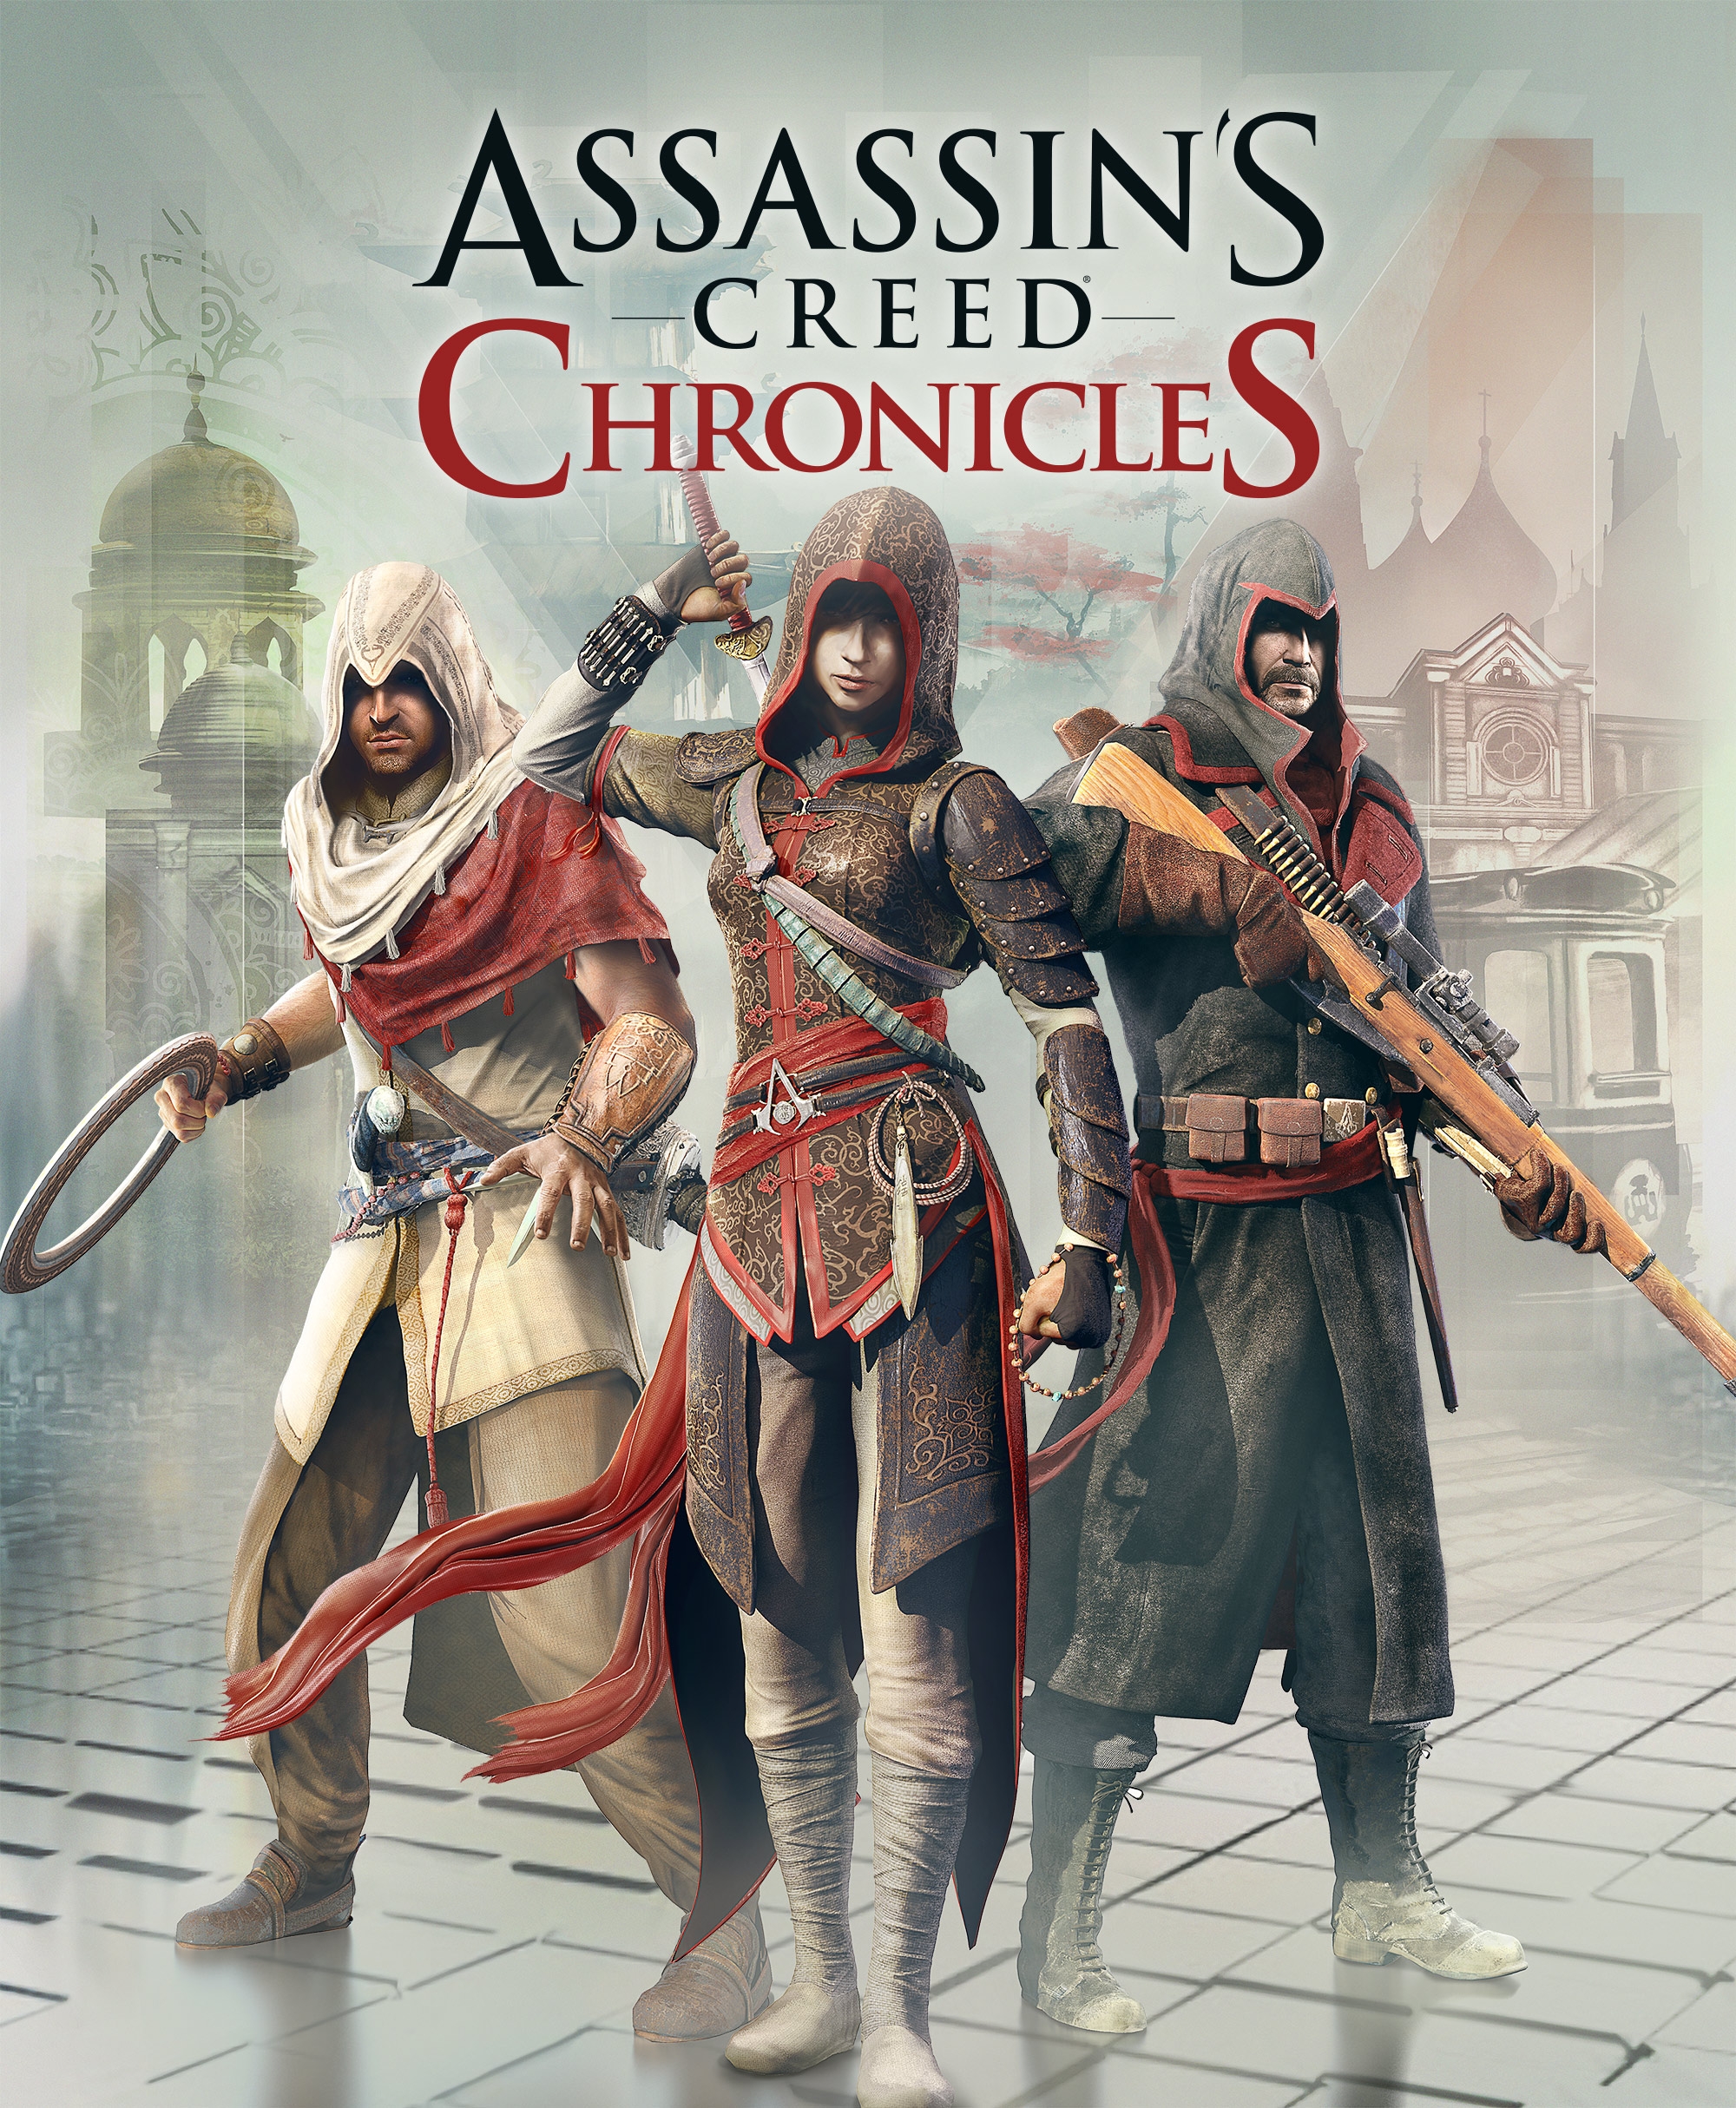 Assassin's Creed III: Official Game Guide, Assassin's Creed Wiki